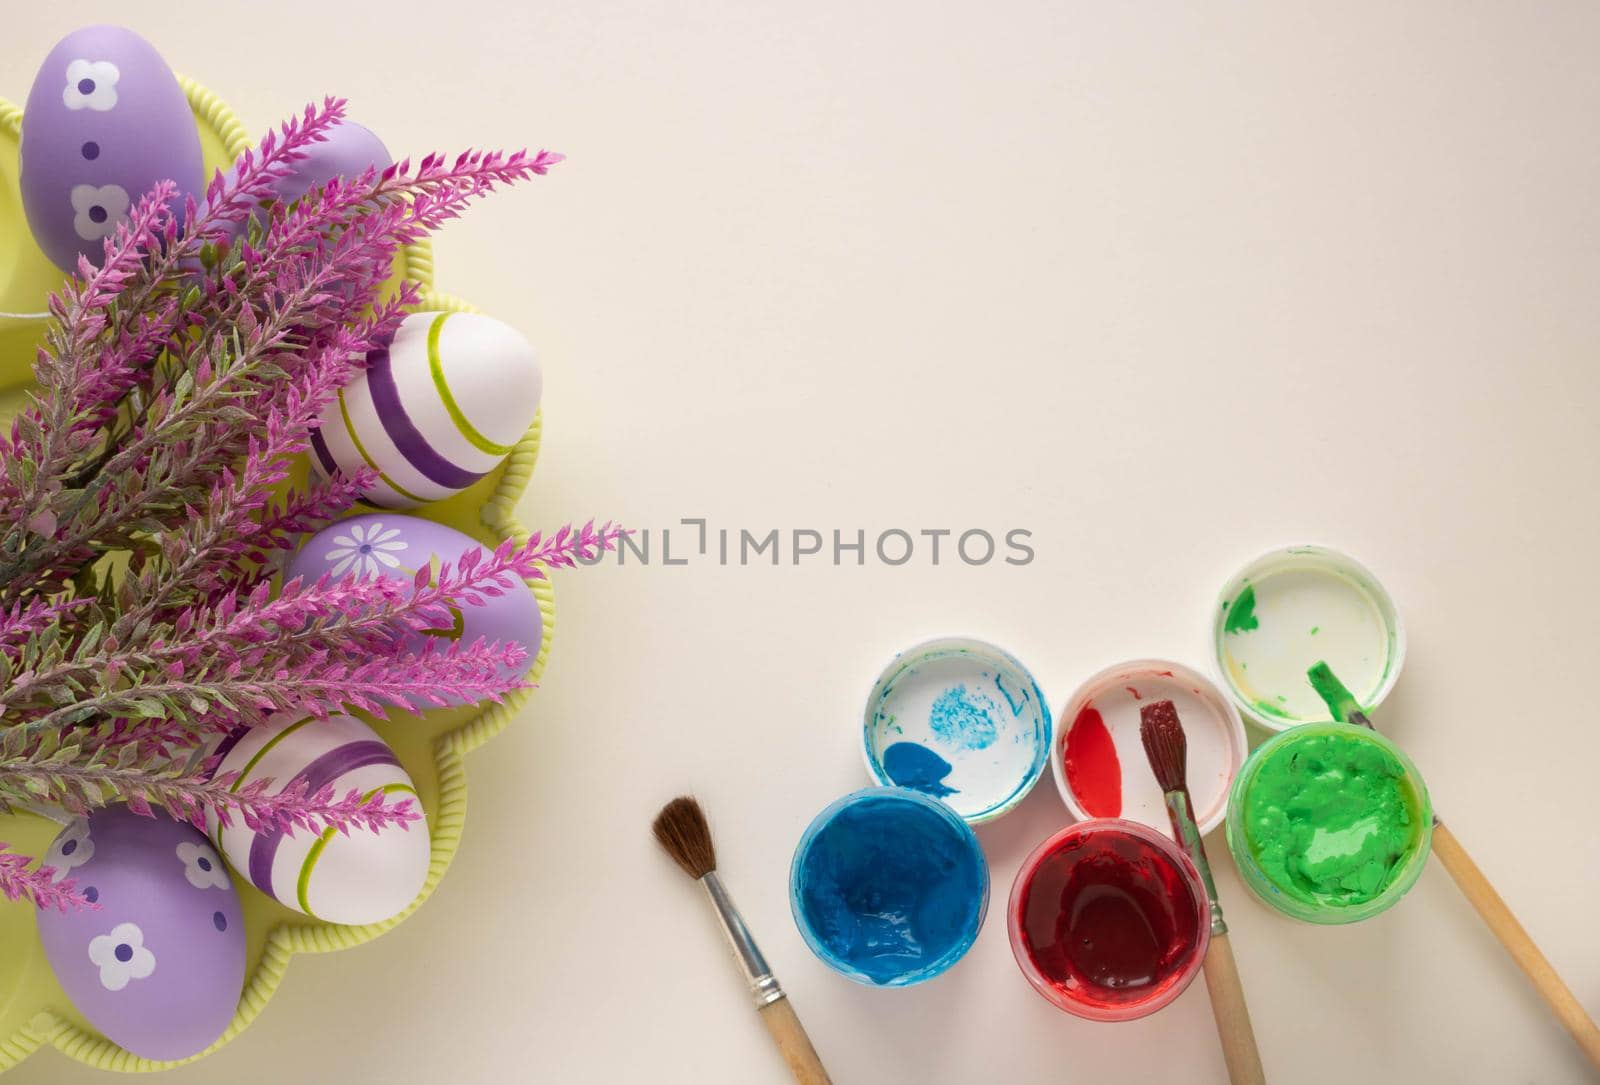 Brushes and open jars with gouache paint red, green, blue lie on a white background, prepared for coloring Easter eggs. Preparation for the Easter holiday.